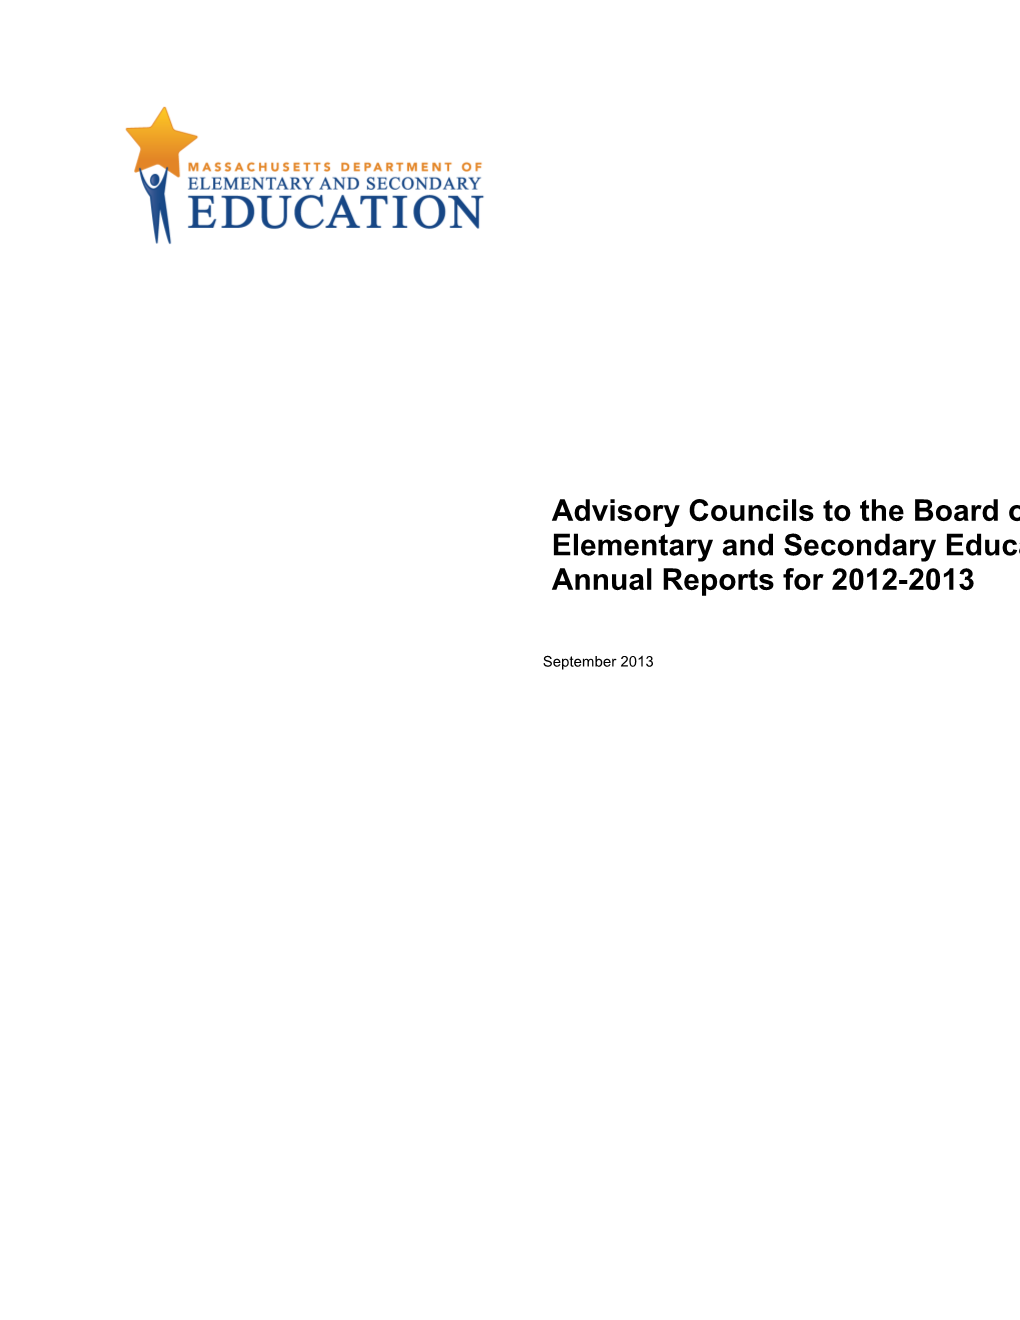 Advisory Councils to the BESE, Annual Reports for 2012-2013